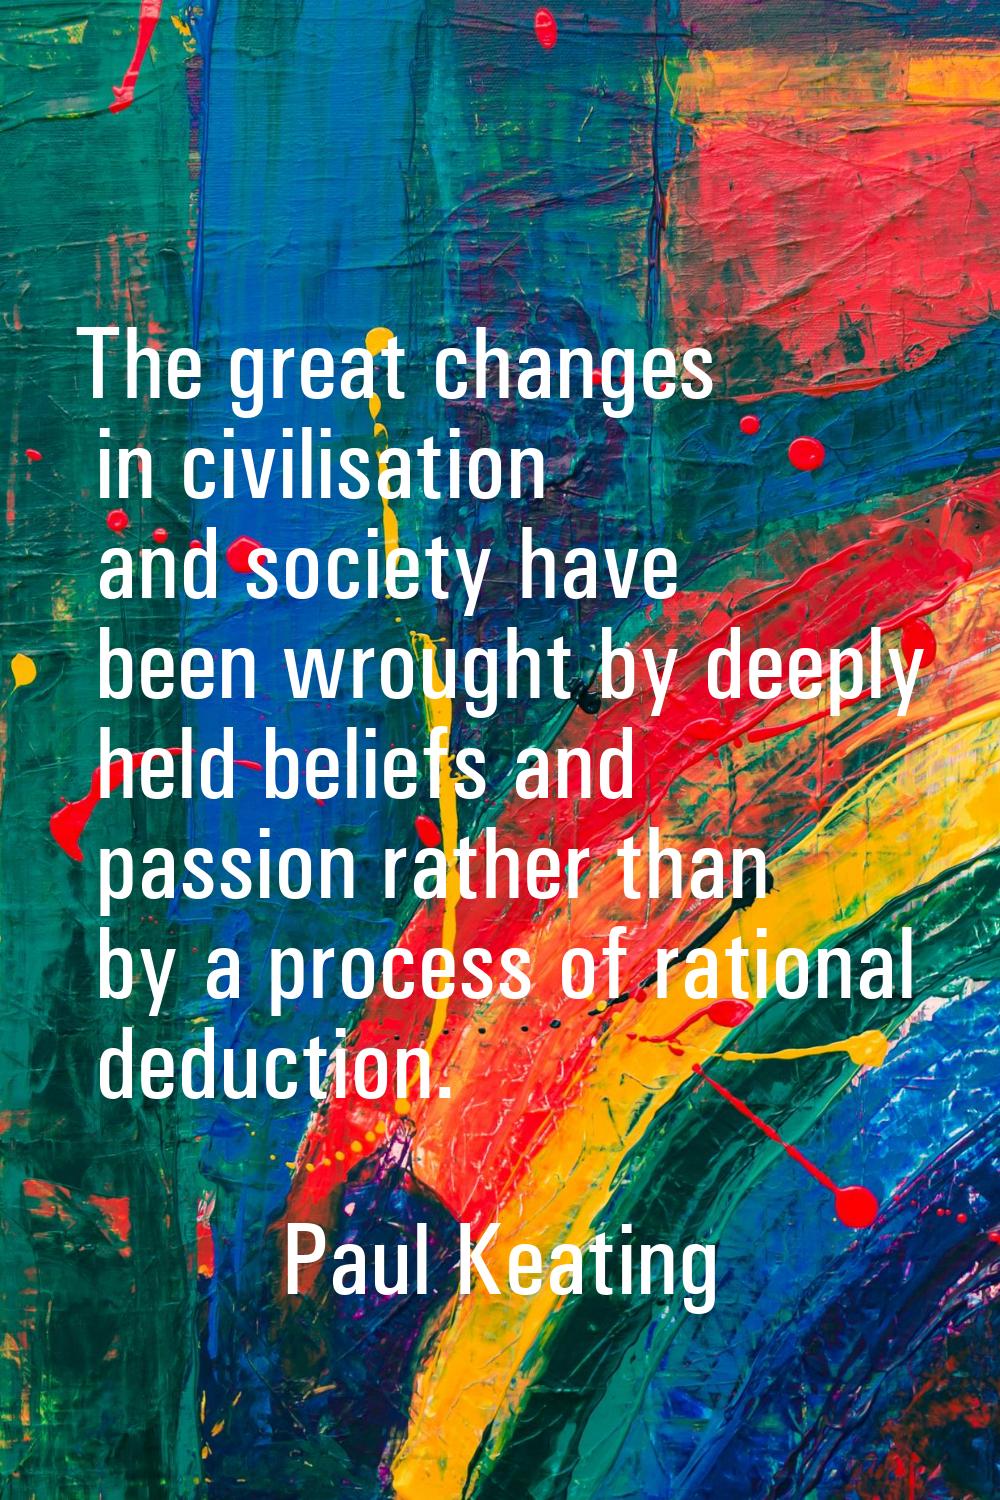 The great changes in civilisation and society have been wrought by deeply held beliefs and passion 